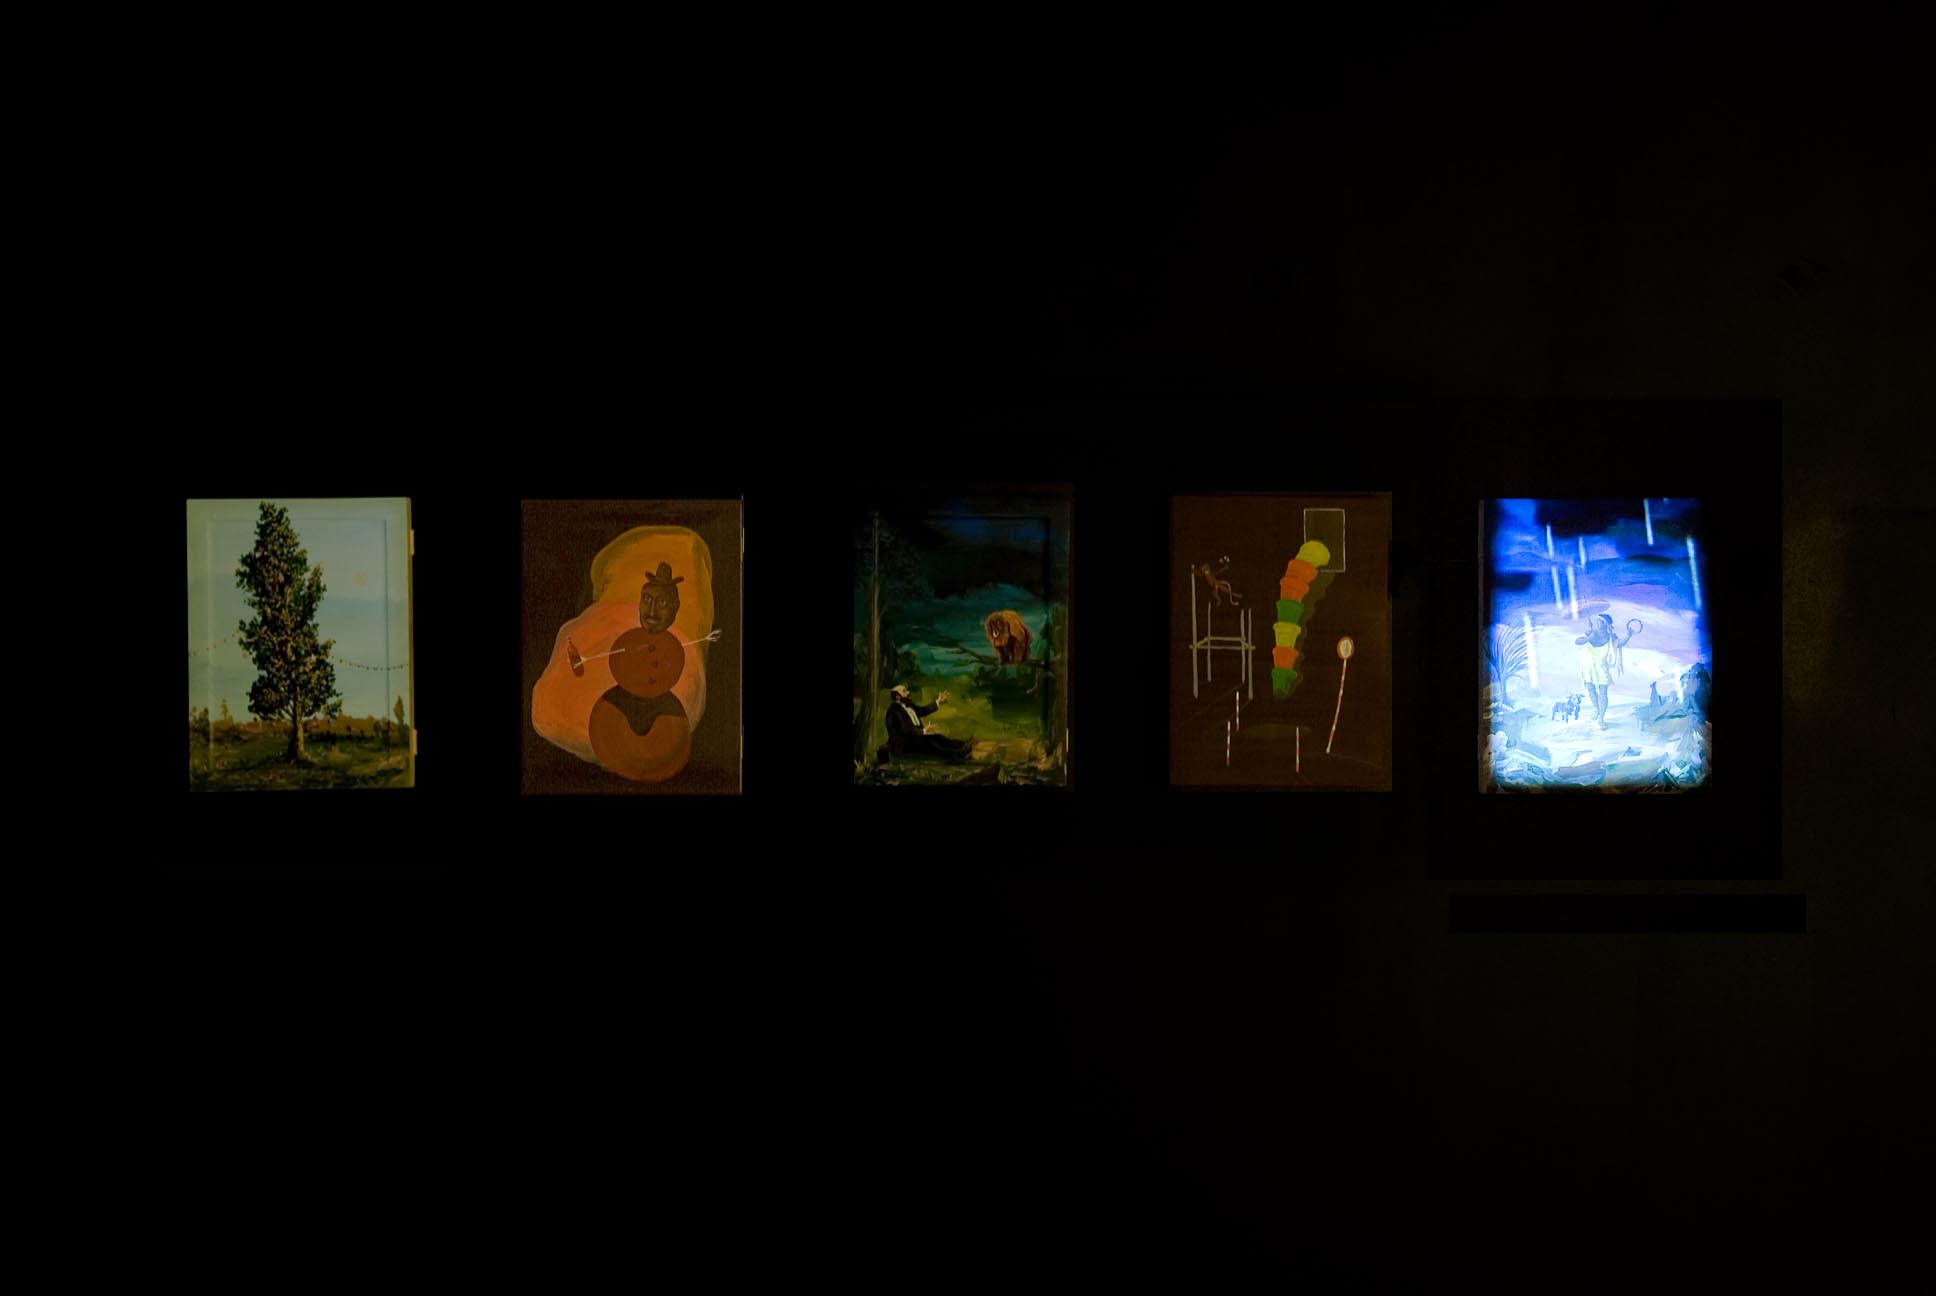     Untitled (Djordje Ozbolt) 2008 Flash Animaton Video Projection and 5 Paintings (Acrylic on Board)  Dimensions Variable 